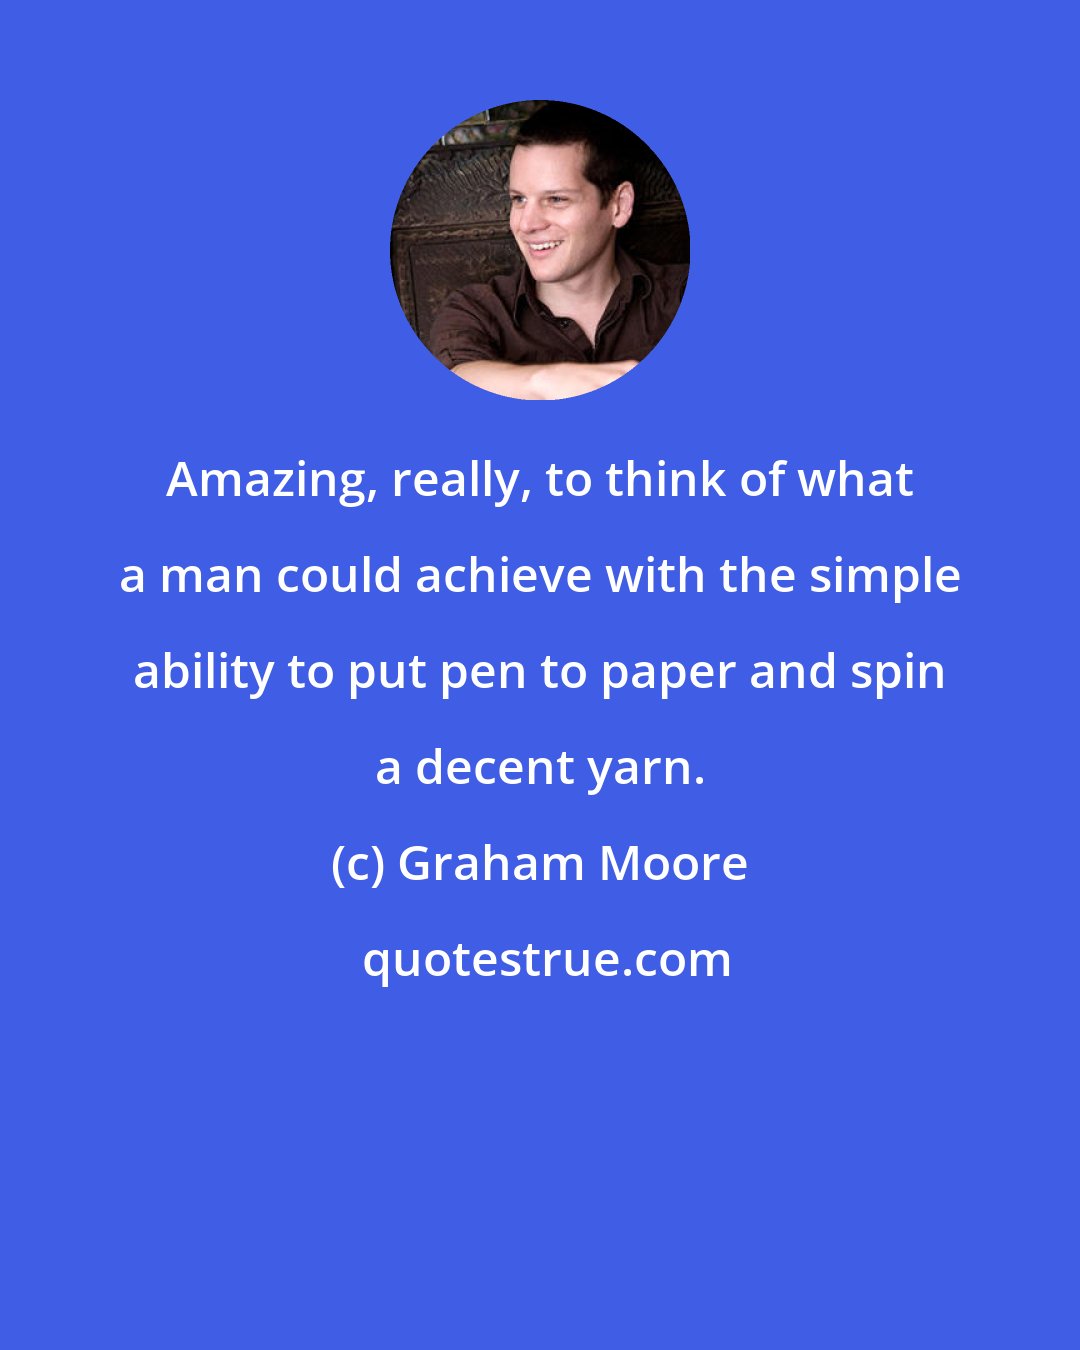 Graham Moore: Amazing, really, to think of what a man could achieve with the simple ability to put pen to paper and spin a decent yarn.